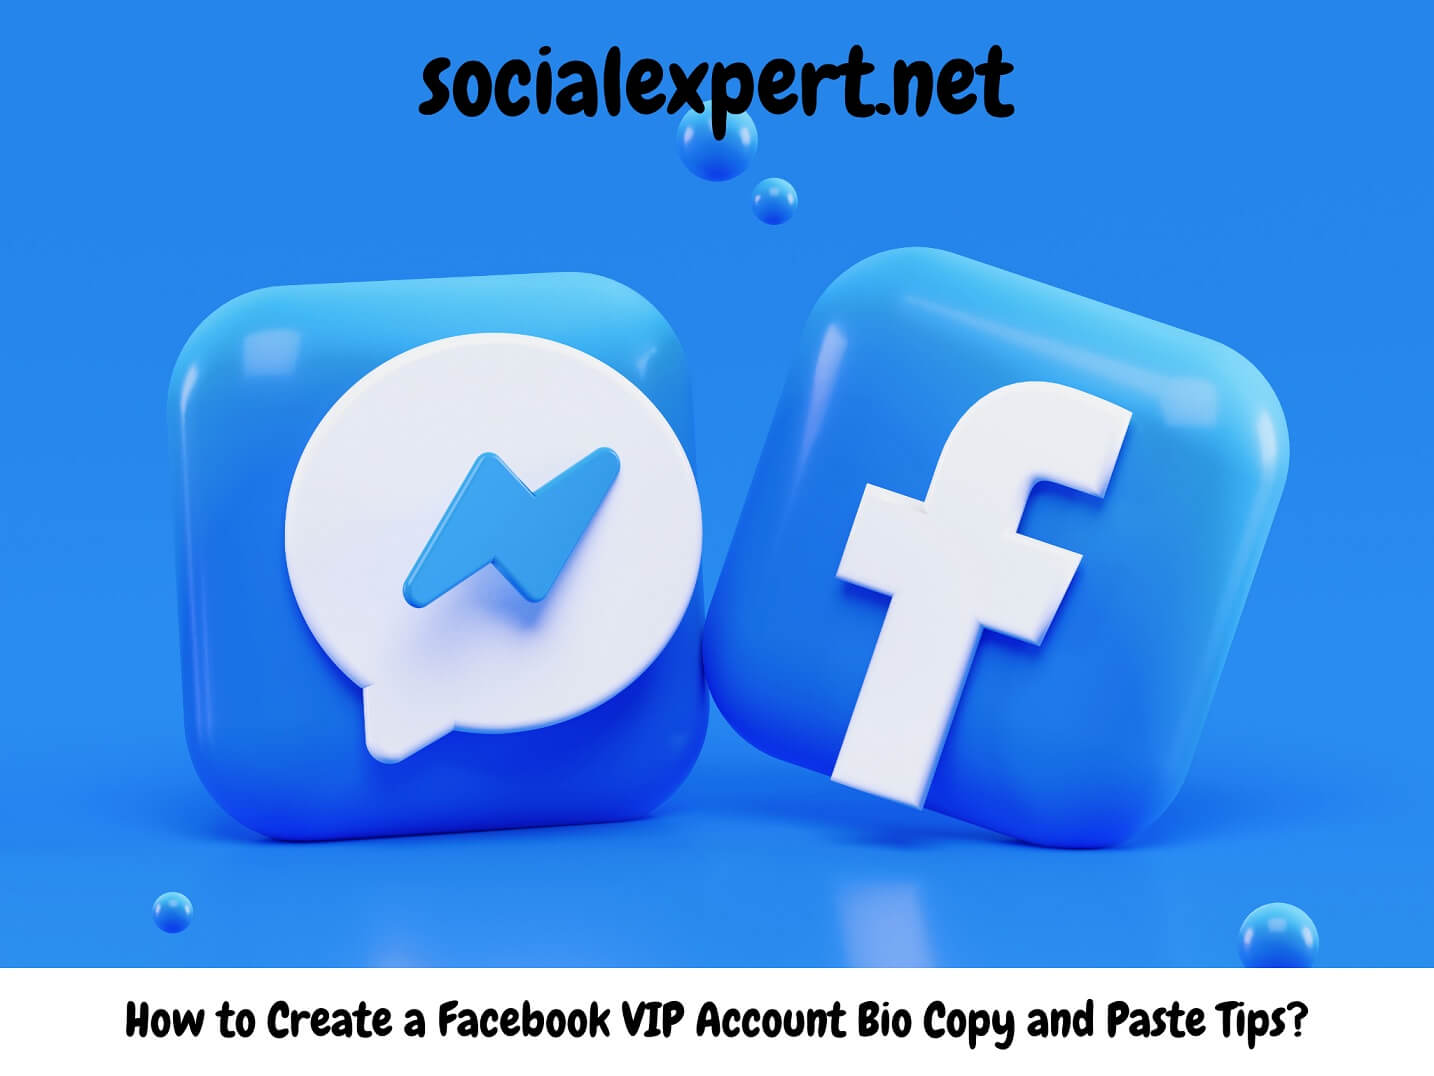 How to Create a Facebook VIP Account Bio Copy and Paste Tips